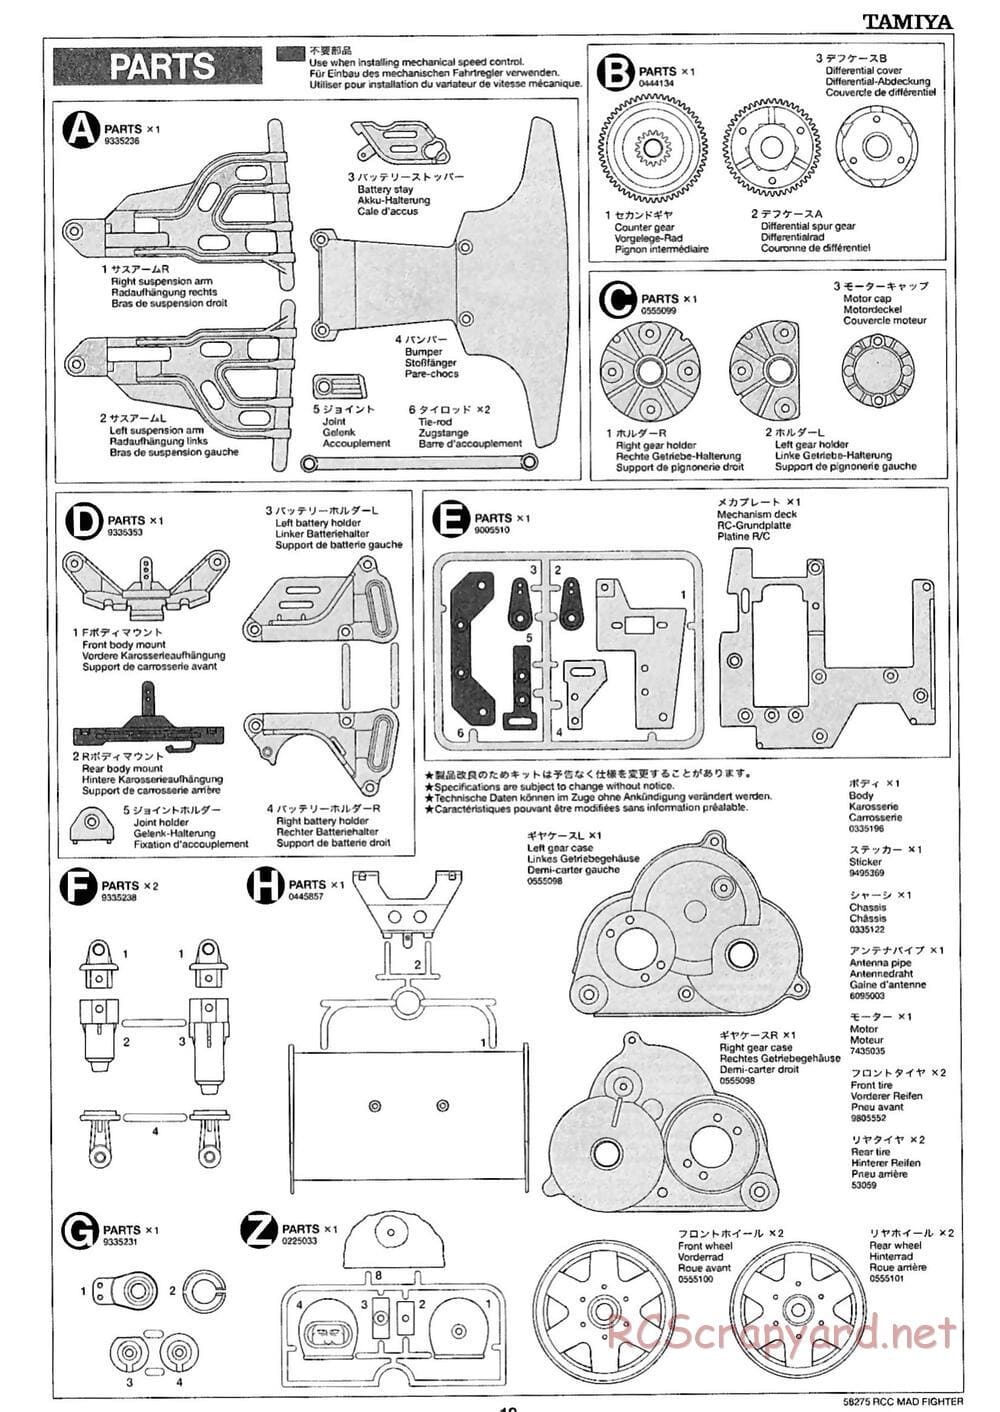 Tamiya - Mad Fighter Chassis - Manual - Page 18